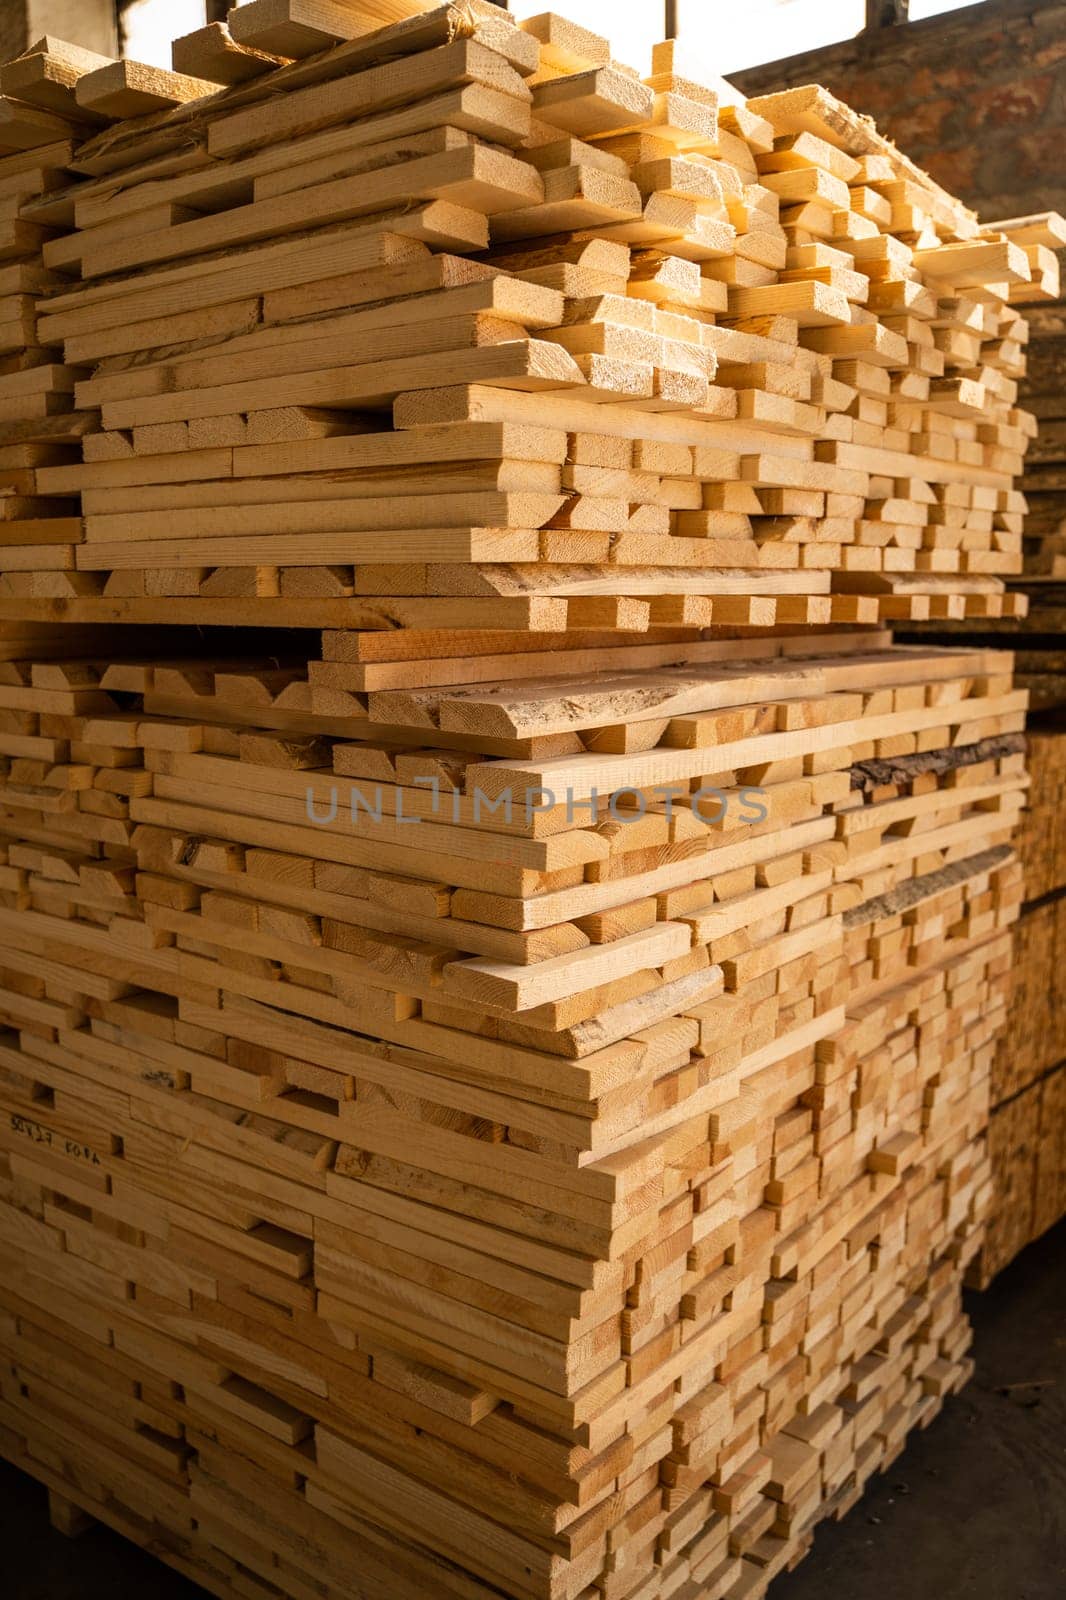 Stacked wooden planks. Hardware store or construction site. Wood for house construction. Building material. Wood warehouse. Wood industry